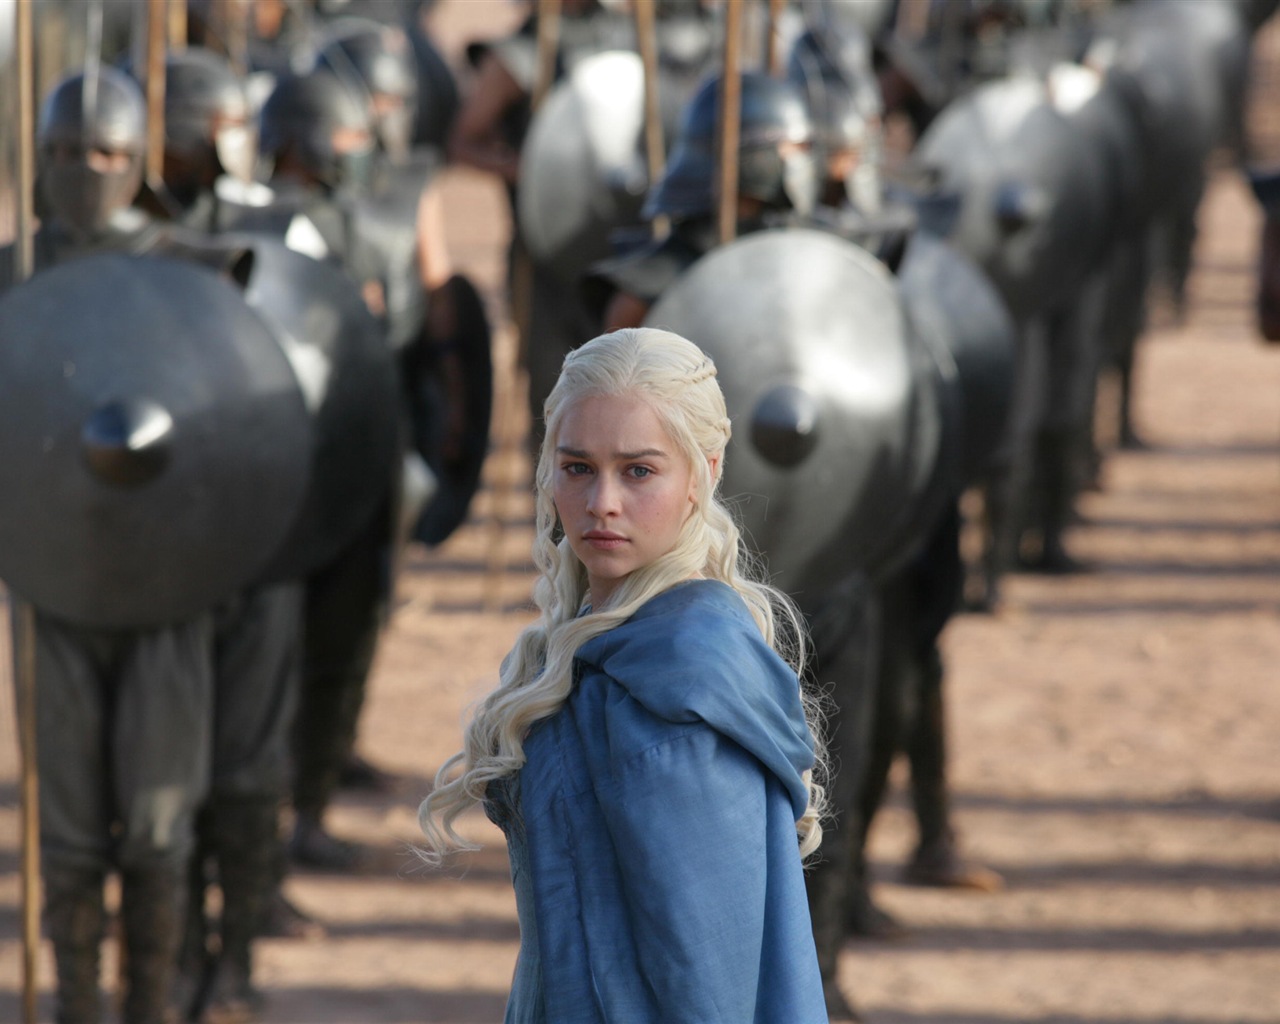 A Song of Ice and Fire: Game of Thrones HD Wallpaper #44 - 1280x1024